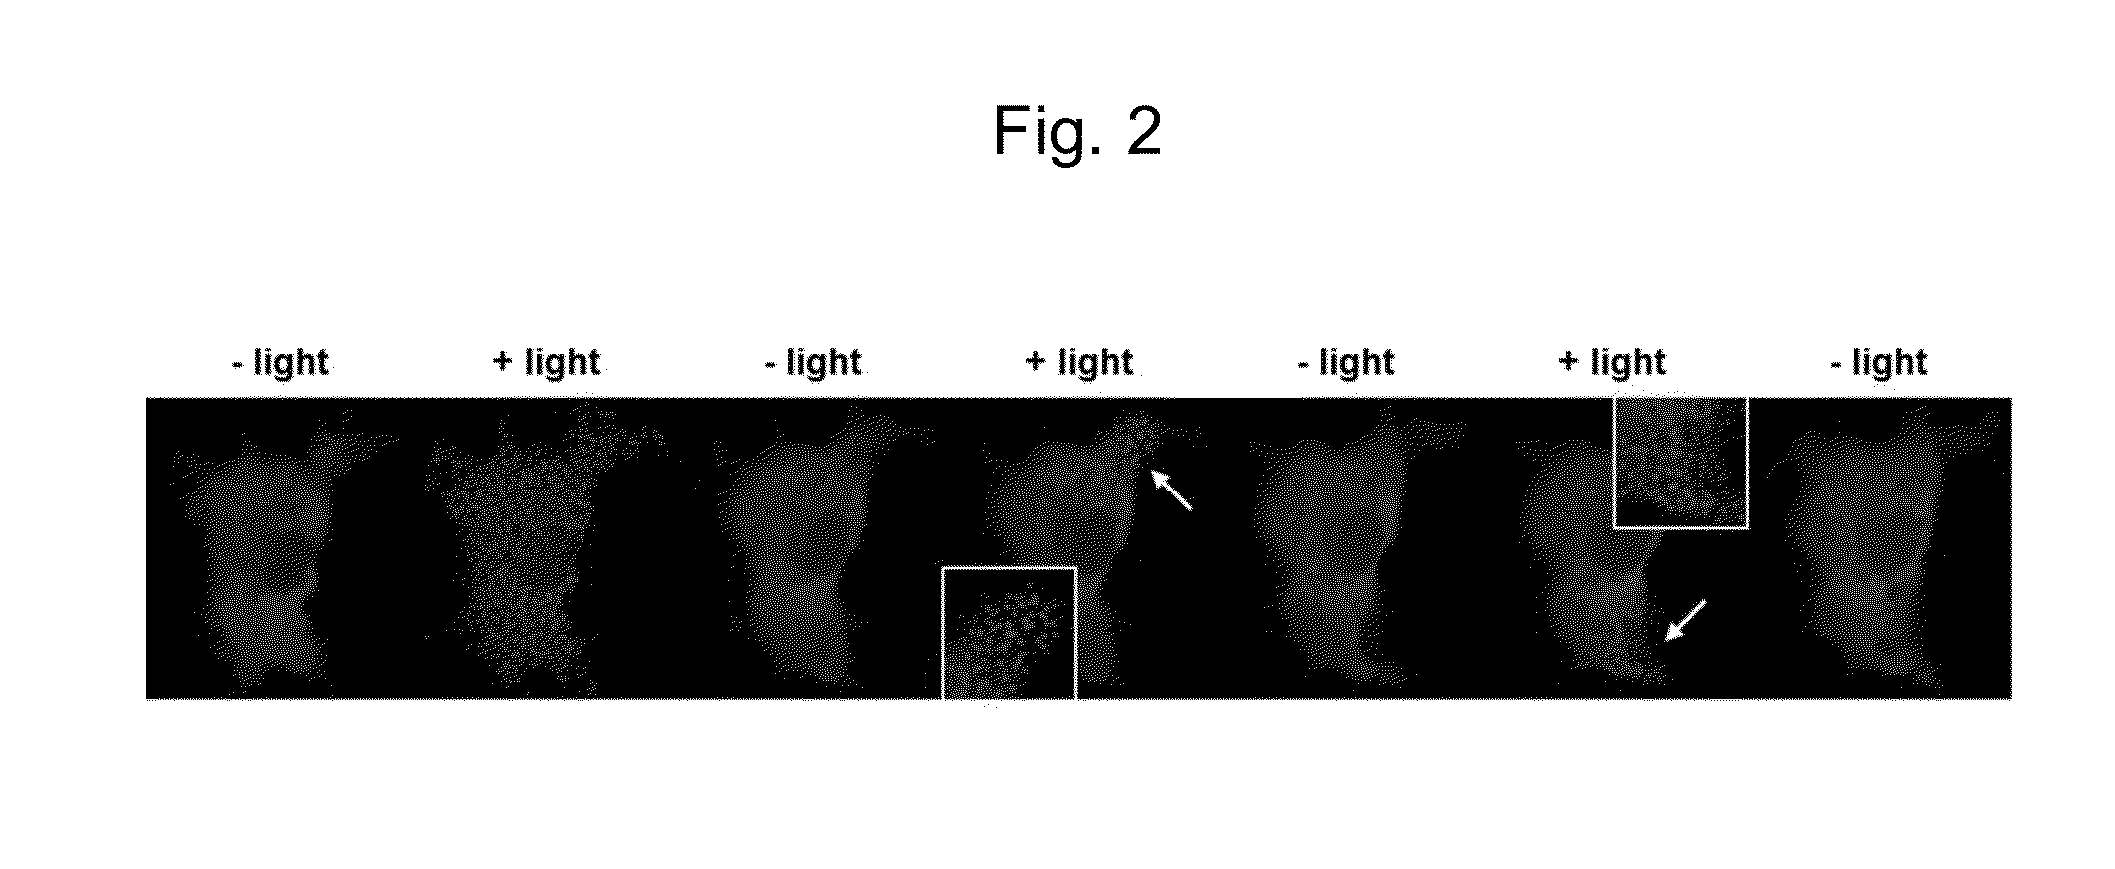 Method for forming a reversible protein nanocluster using light in a cell